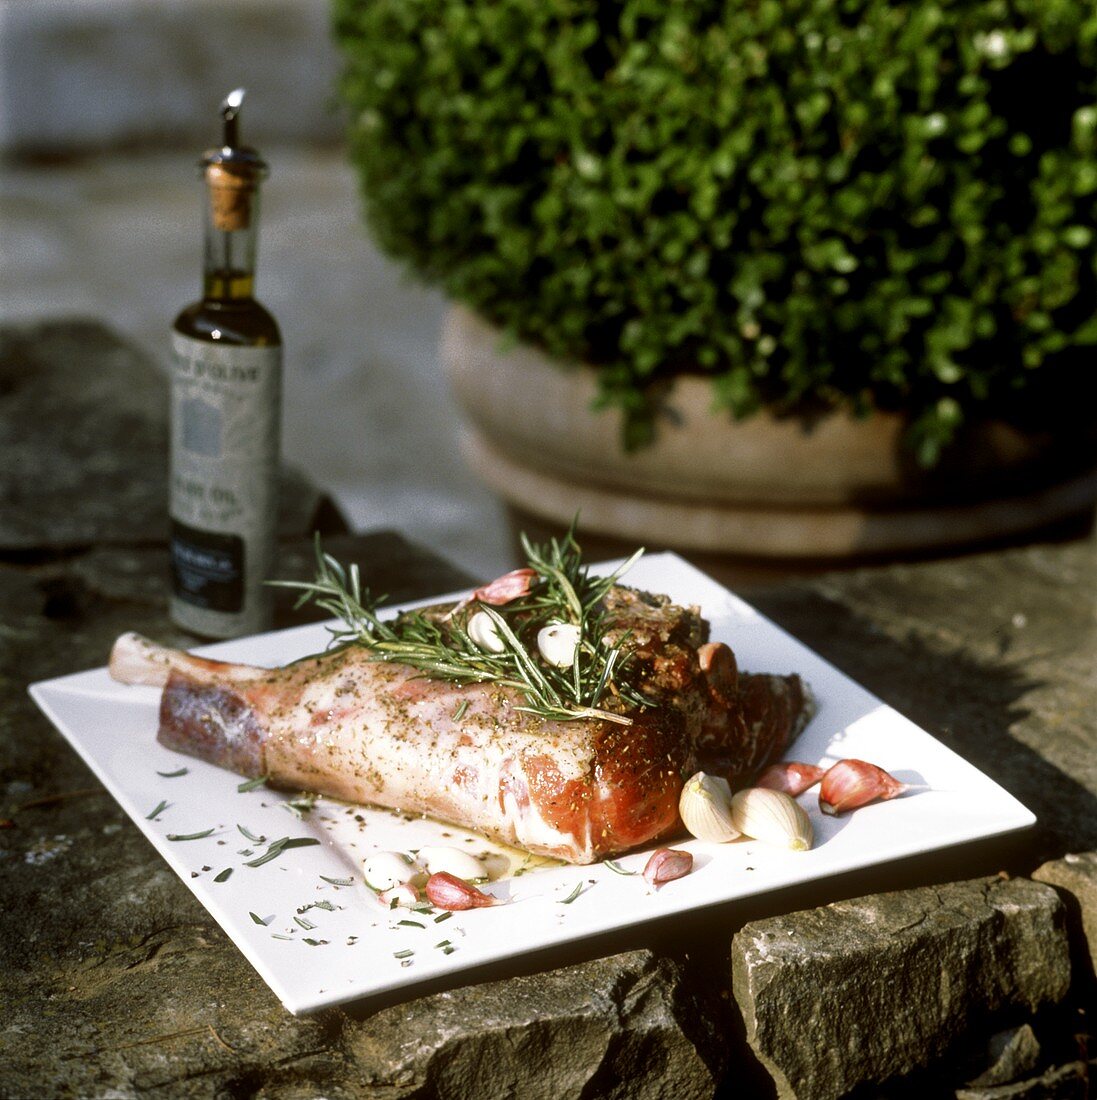 Leg of lamb with rosemary on stone wall, olive oil bottle